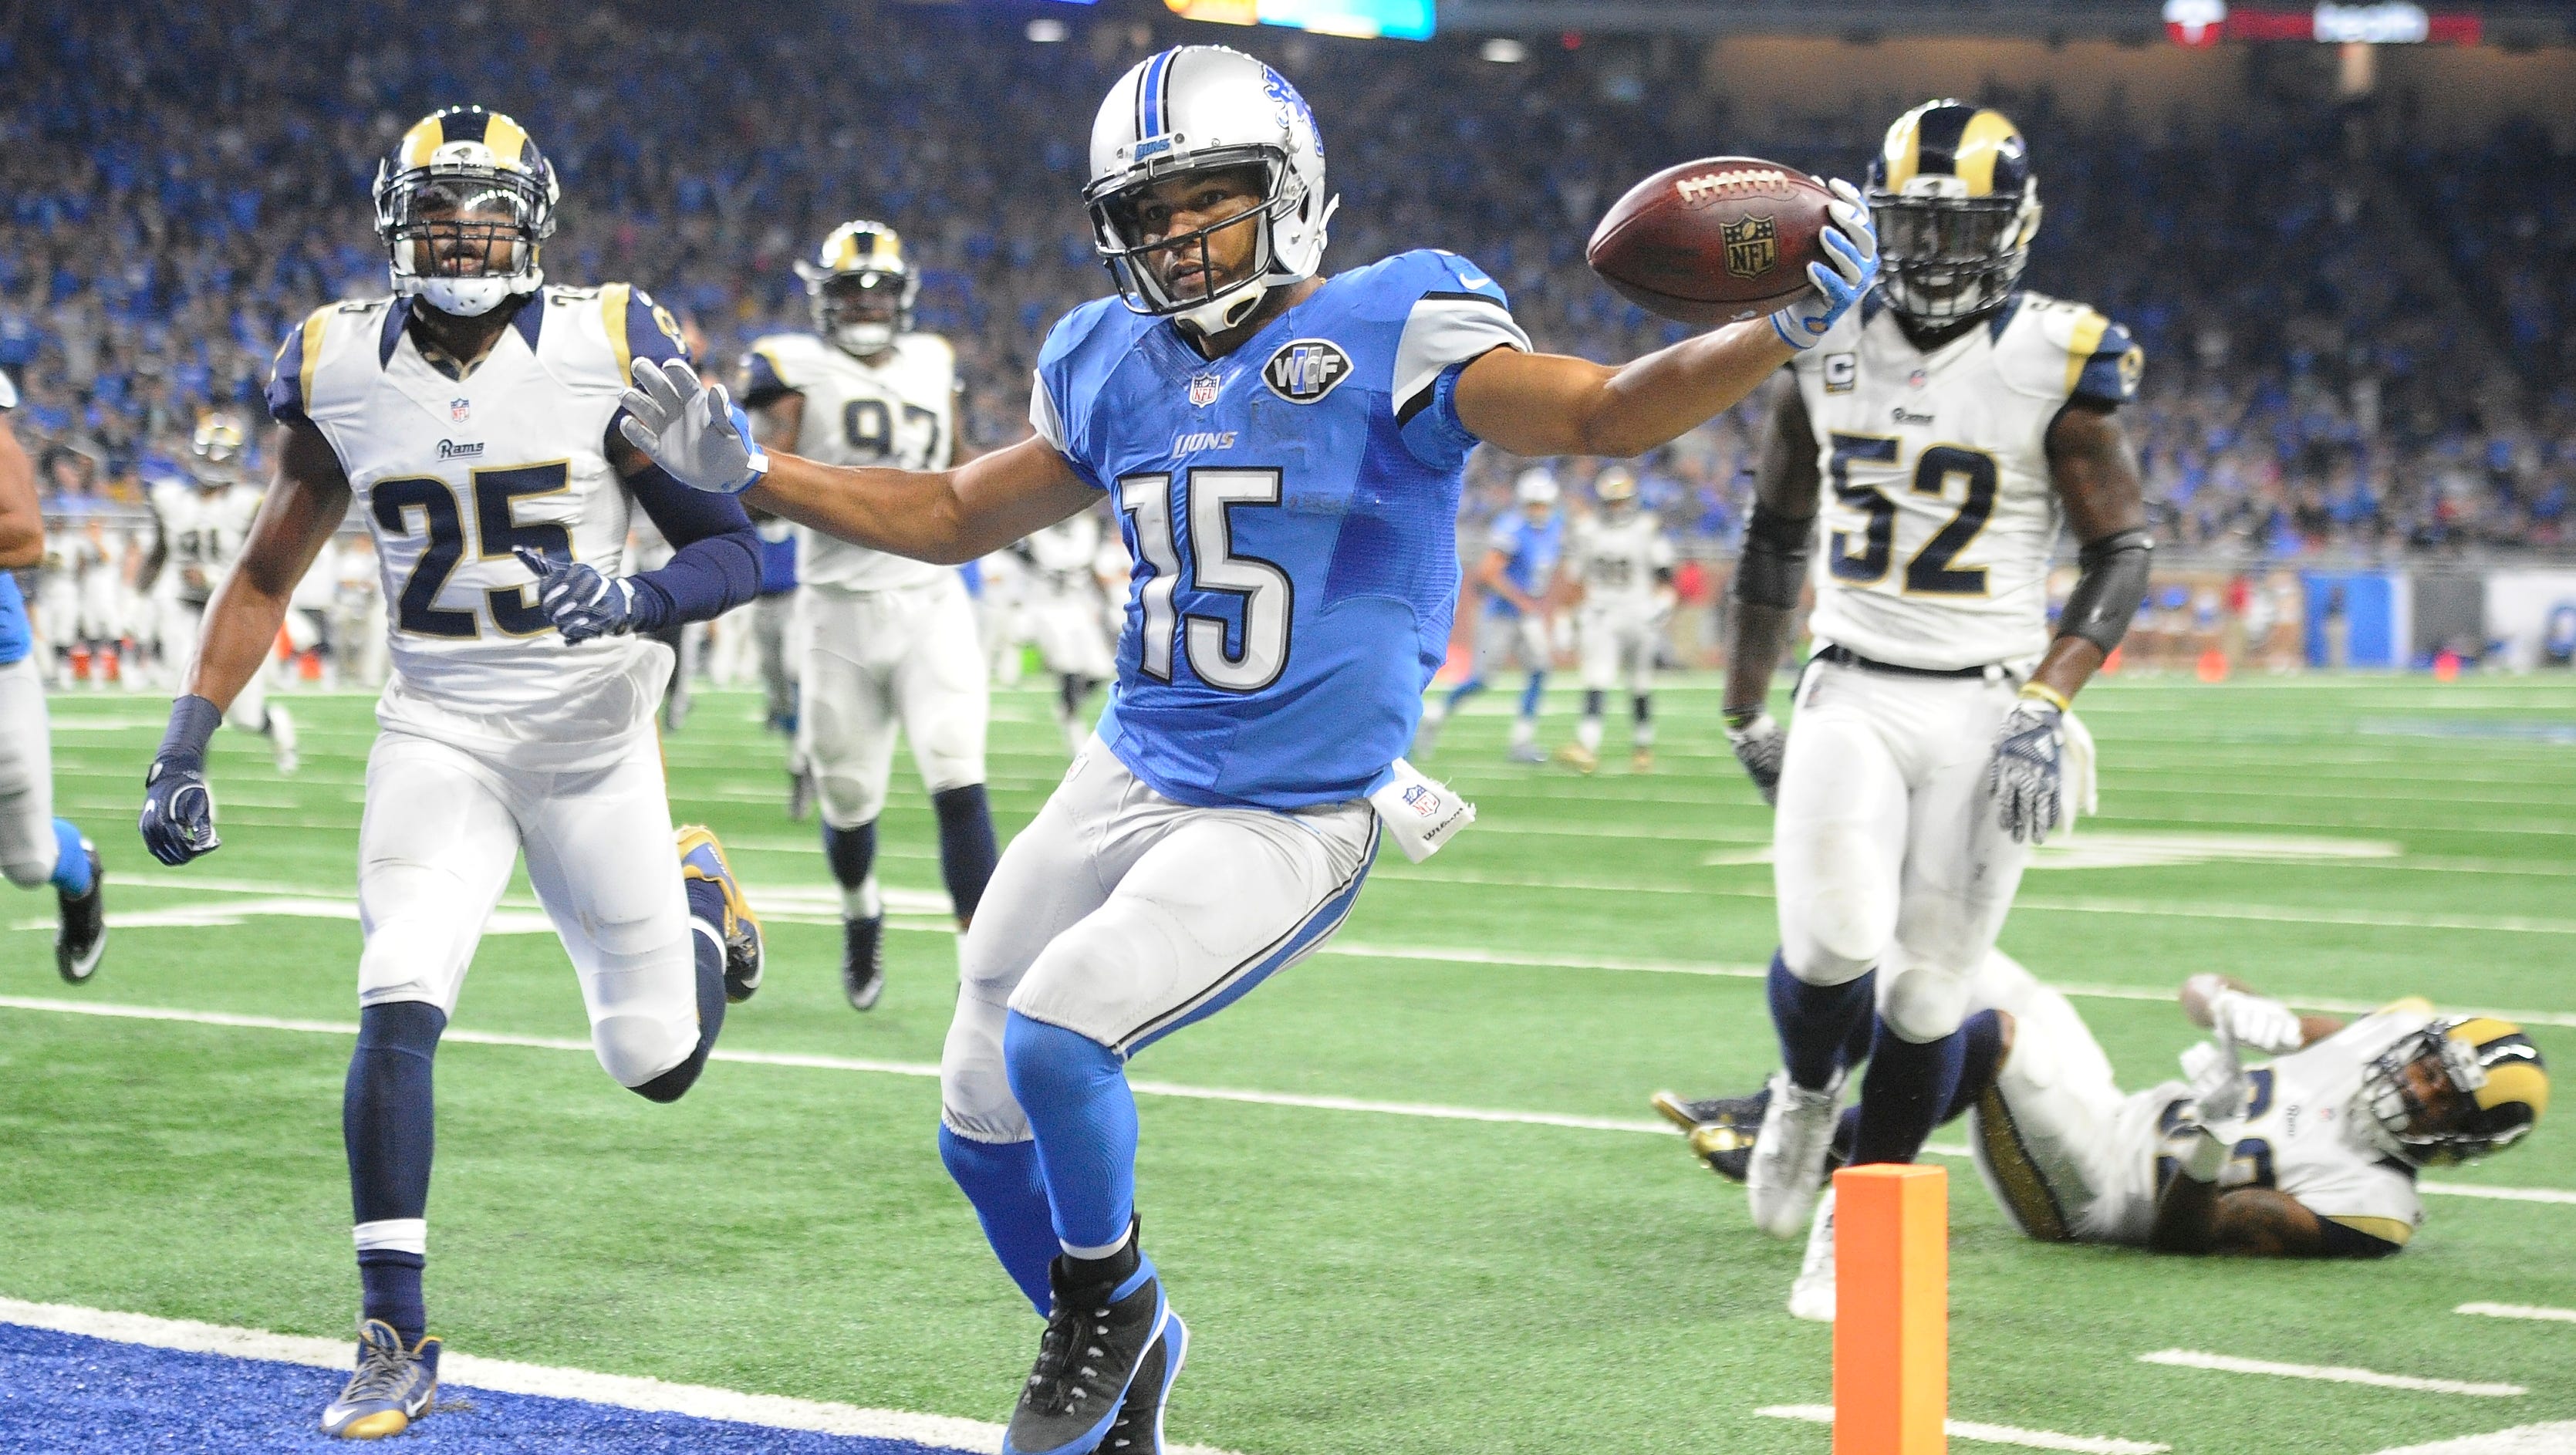 Lions wide receiver Golden Tate tip-toes into the end zone for a touchdown, to tie the score at 28 late in the fourth quarter of the 31-28 victory over the Los Angeles Rams at Ford Field in Detroit on October 16, 2016.